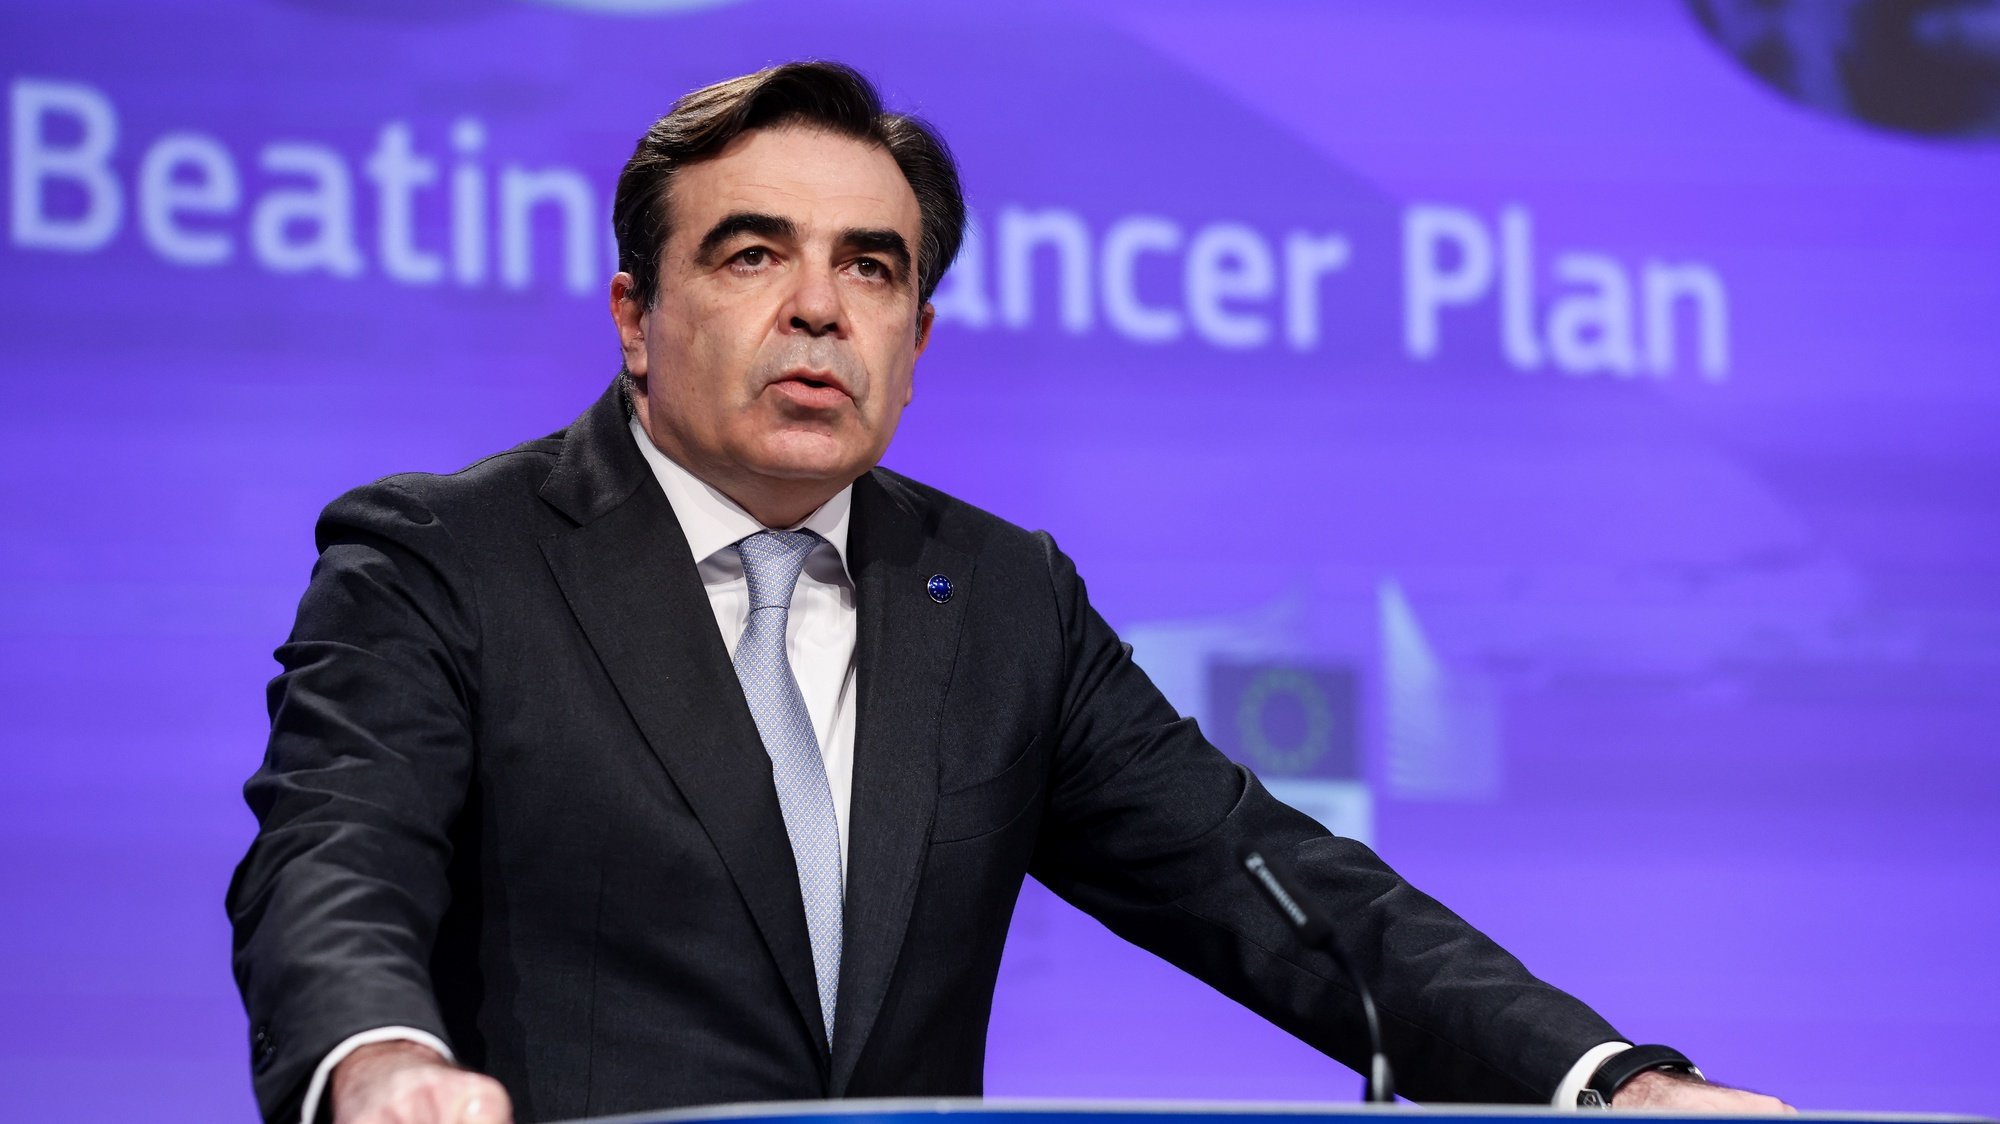 epa08984181 European Commission vice-president for &#039;Protecting our European Way of Life&#039; Margaritis Schinas speaks during a press conference on Europe&#039;s Beating Cancer Plan at the European Union headquarters in Brussels, Belgium, 03 February 2021.  EPA/KENZO TRIBOUILLARD / POOL